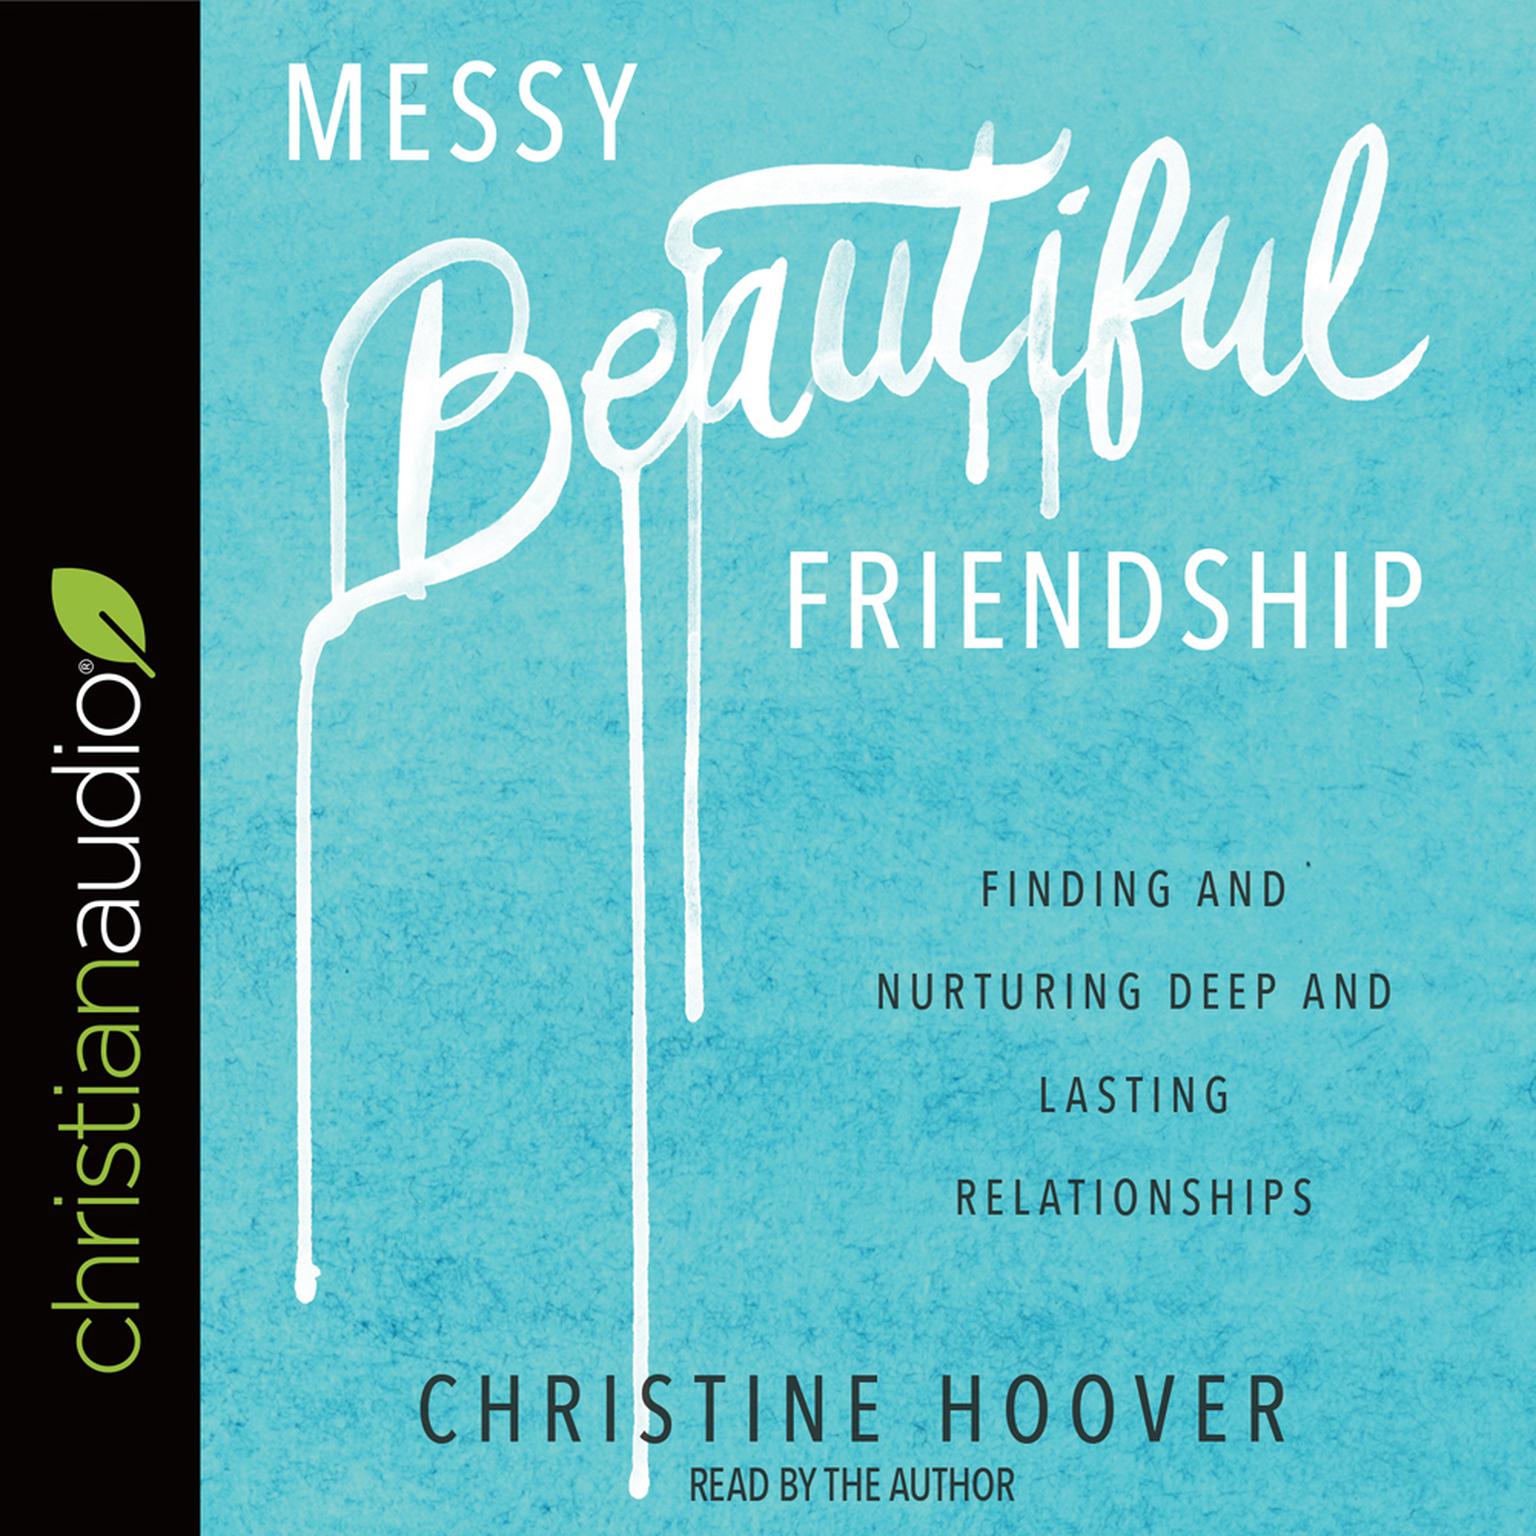 Messy Beautiful Friendship: Finding and Nurturing Deep and Lasting Relationships Audiobook, by Christine Hoover